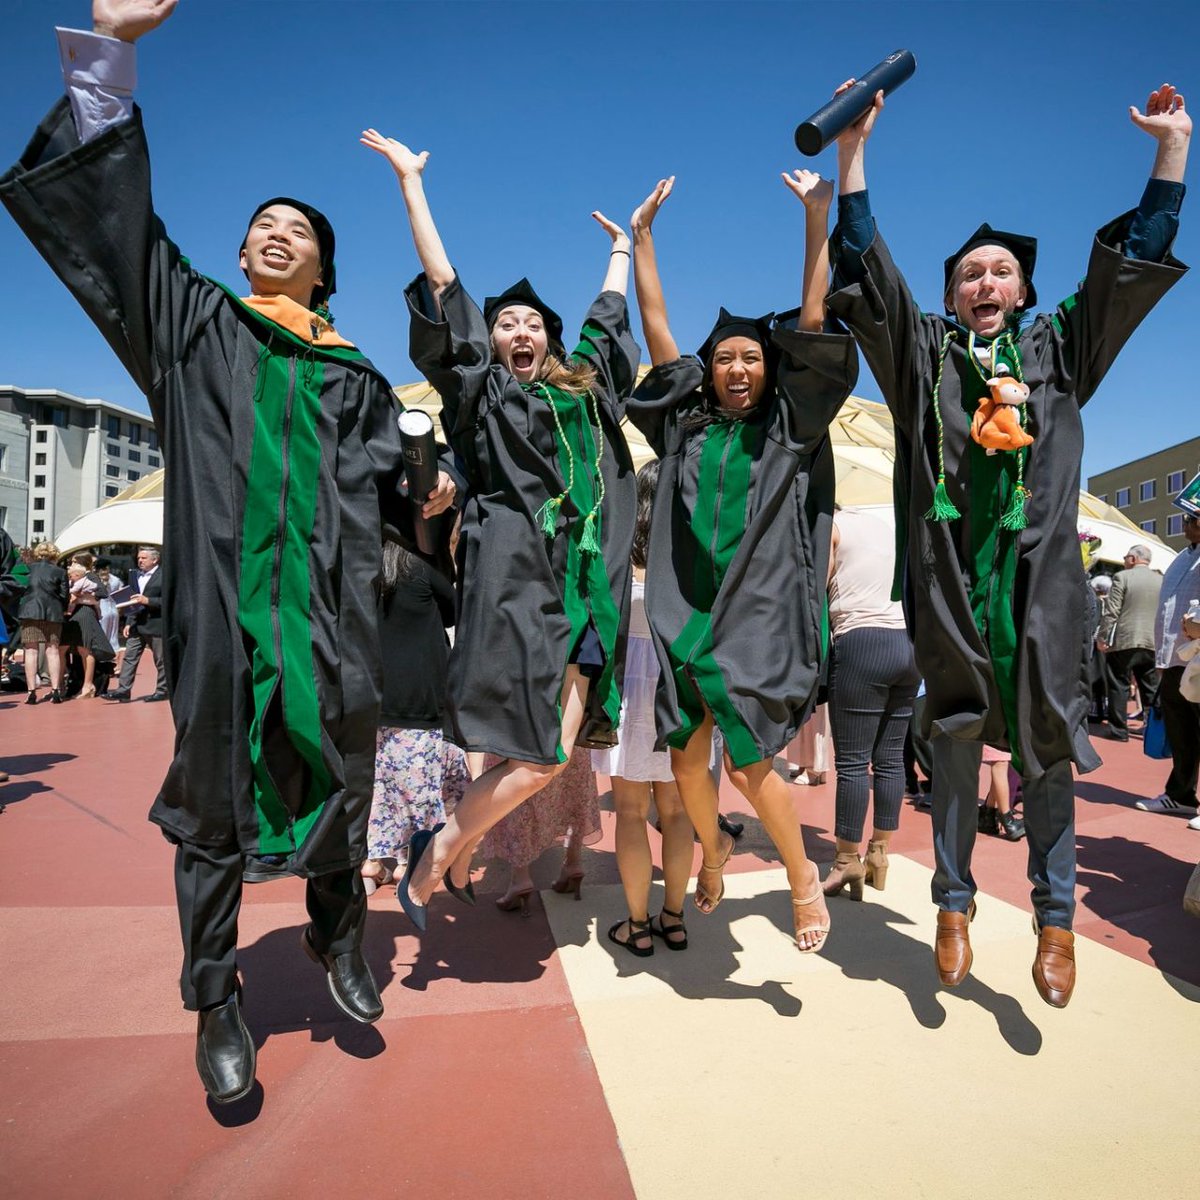 Can you feel the excitement building? We're just one week away from celebrating the incredible achievements of our M.D. Class of 2024 on May 15! 🎓 🎉

For more details and live stream link, visit med.unr.edu/graduation
#UNRMed #PackPride #FutureDoctorsStartHere #NVGrad2024